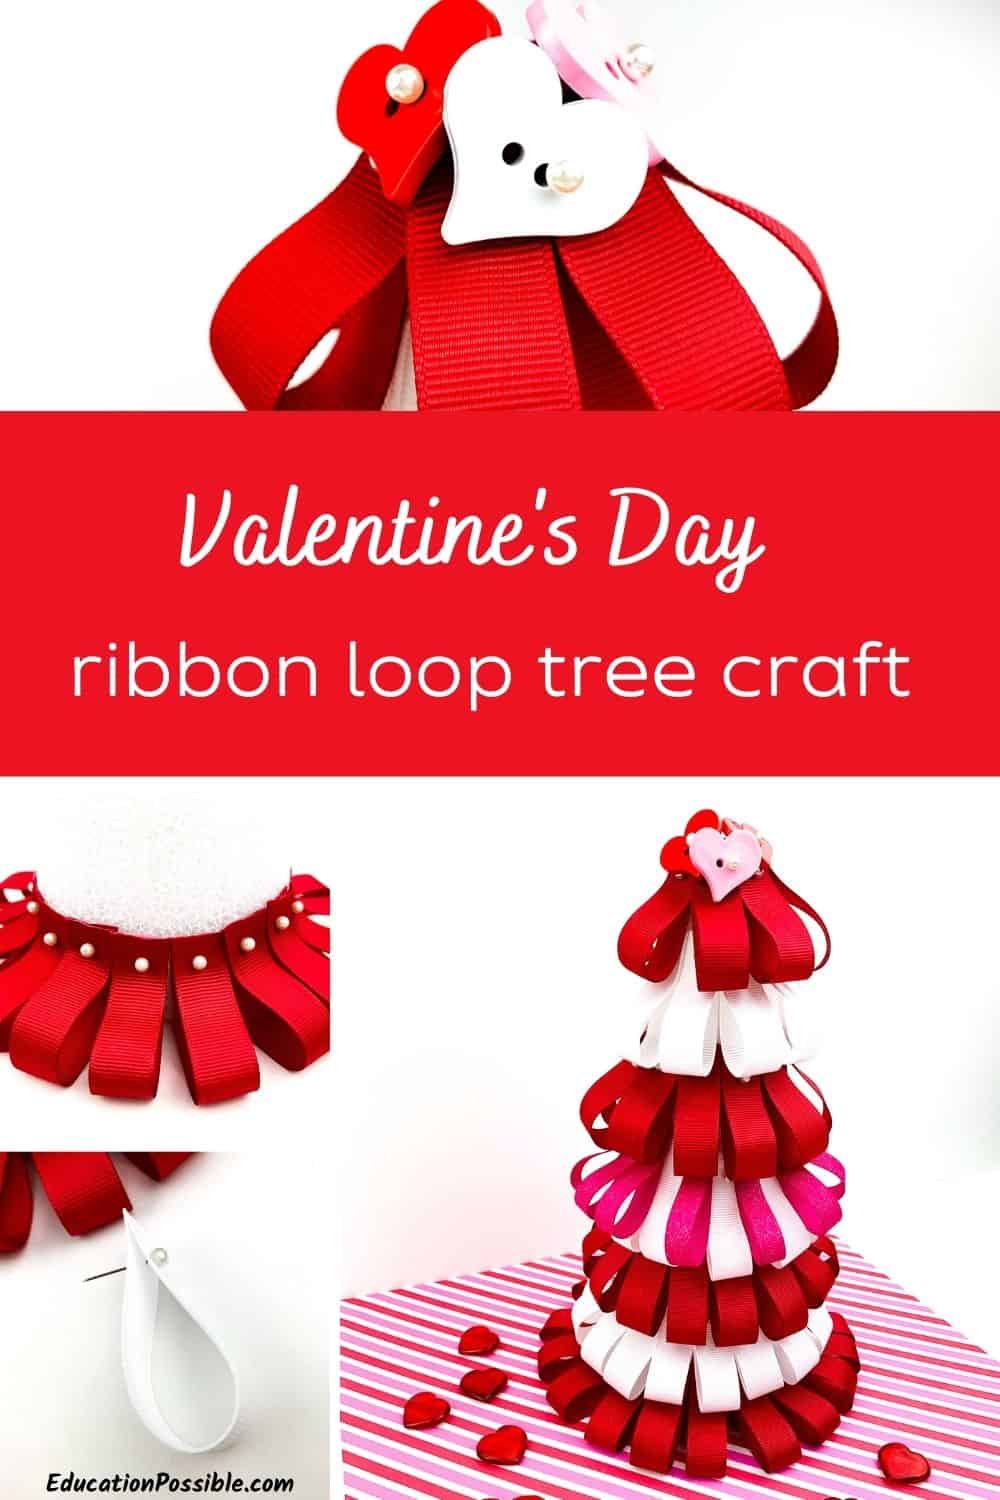 Collage of 4 images showing you how to make a Valentine's Day ribbon tree, as well as an image of the final craft project.